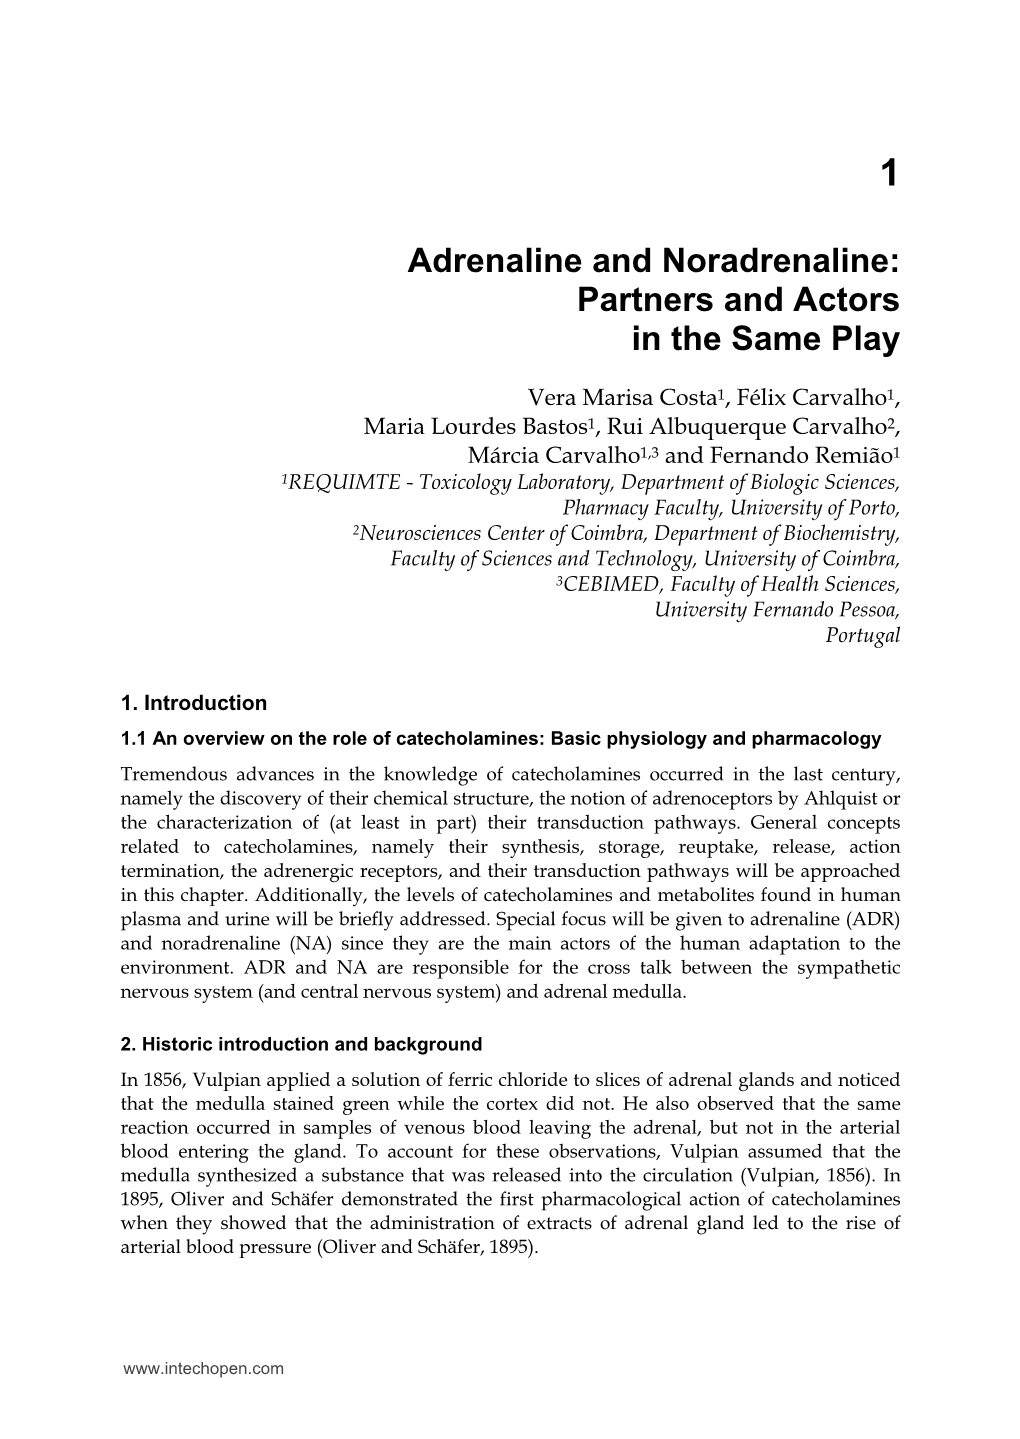 Adrenaline and Noradrenaline: Partners and Actors in the Same Play